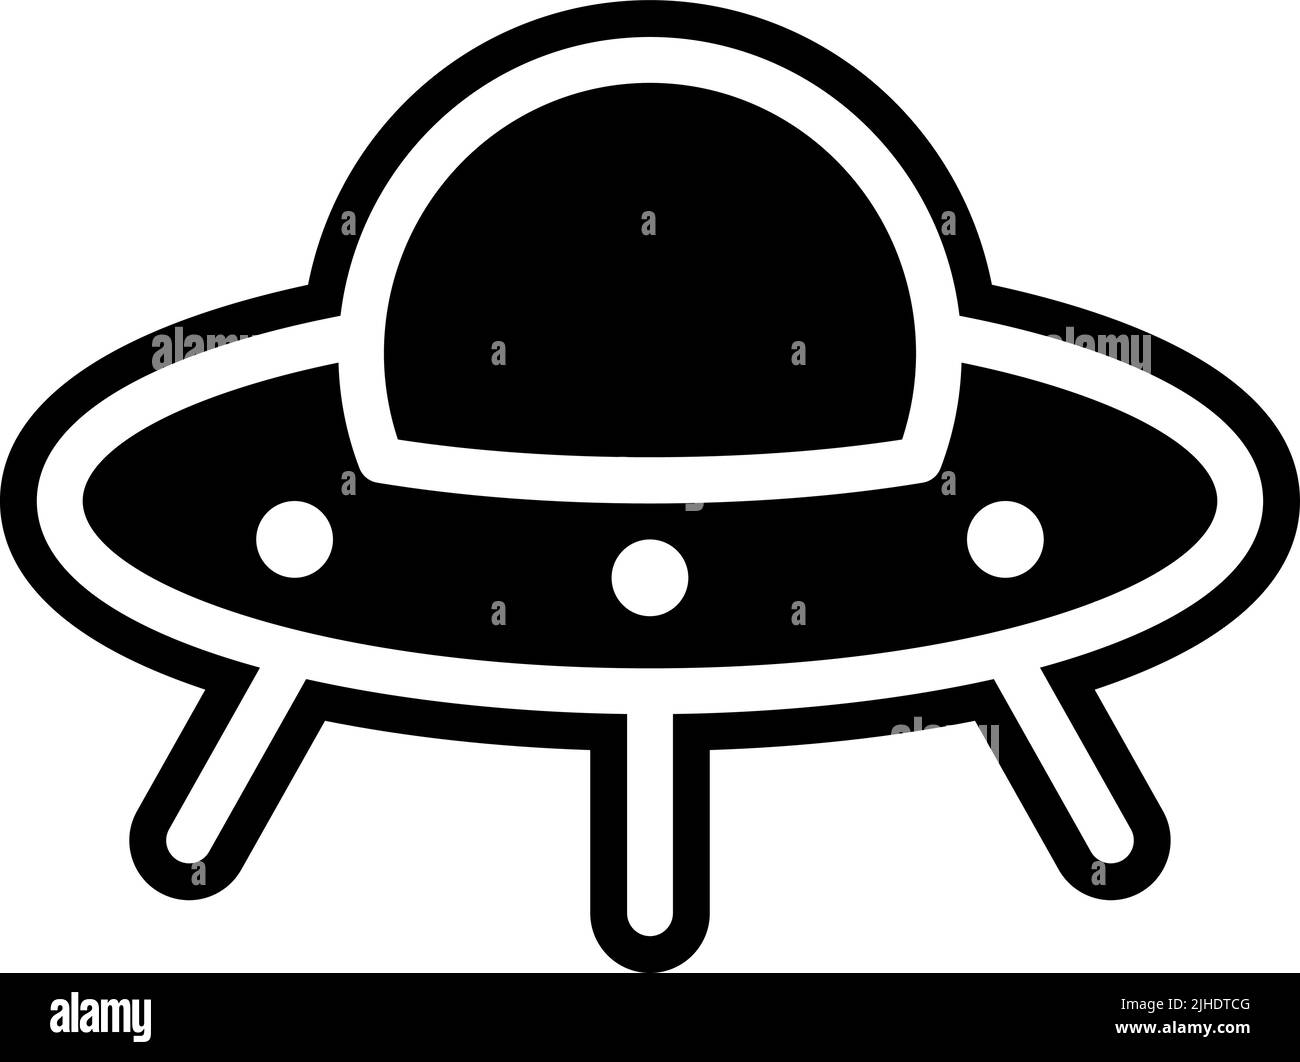 Space ufo Black and White Stock Photos & Images - Alamy